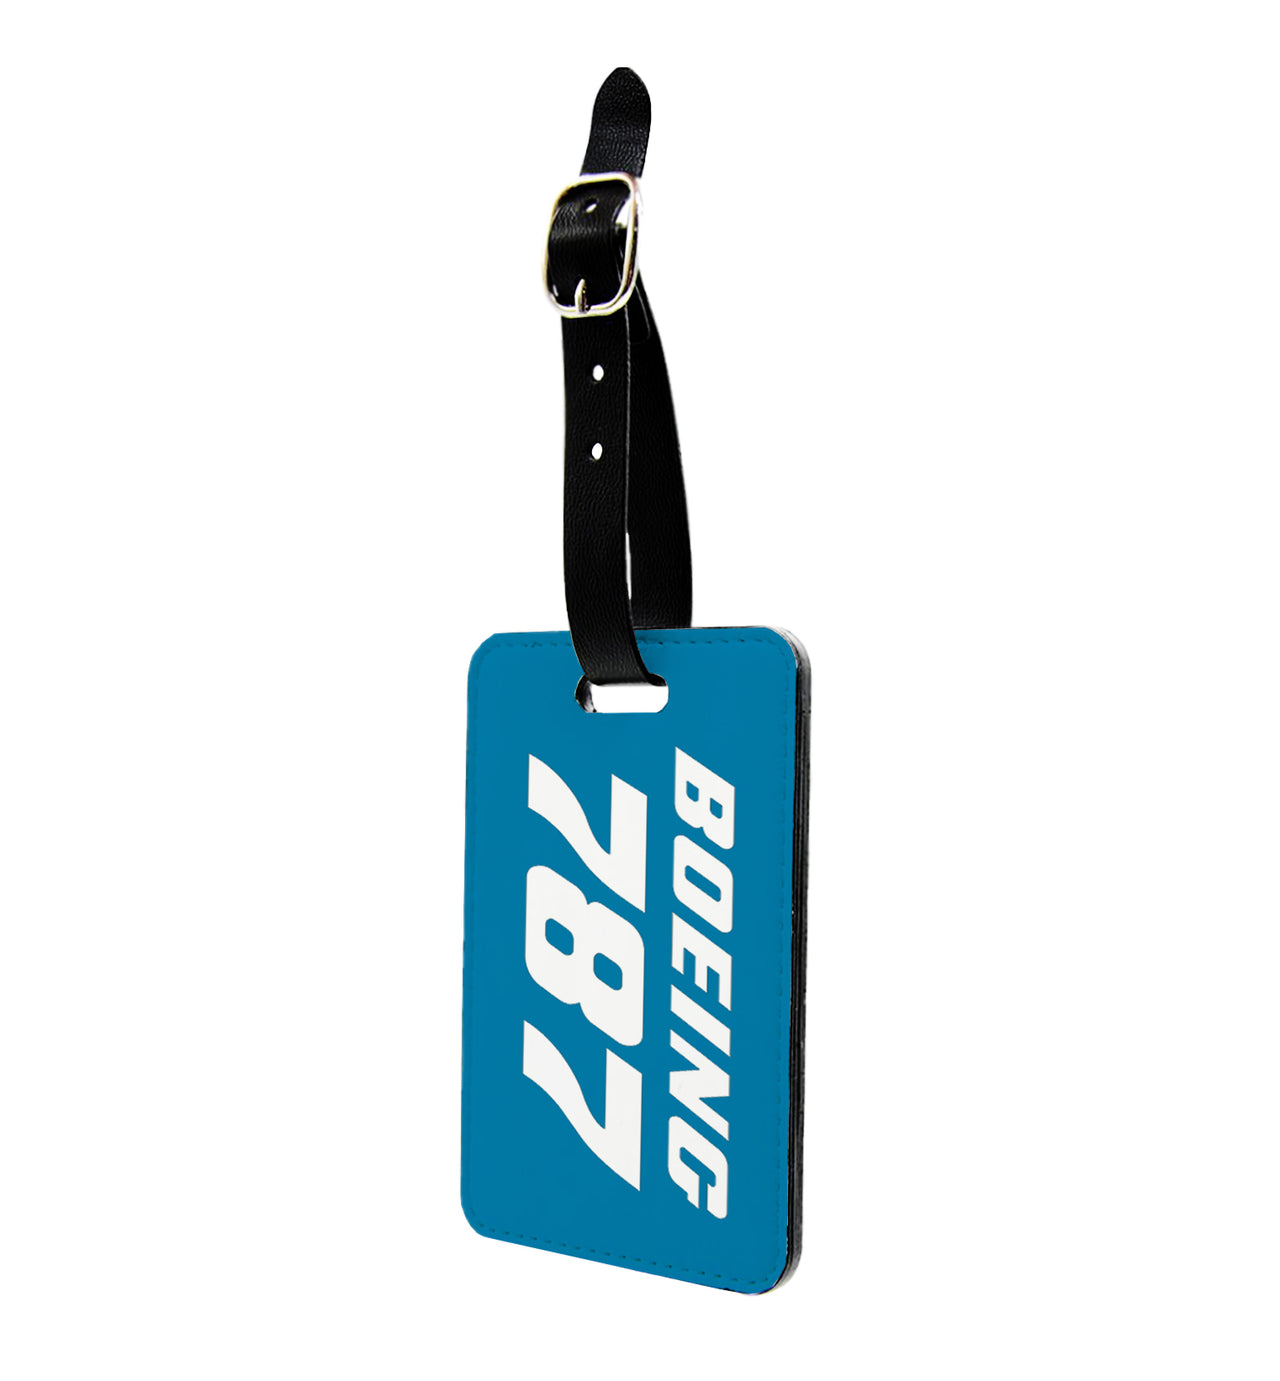 Boeing 787 & Text Designed Luggage Tag